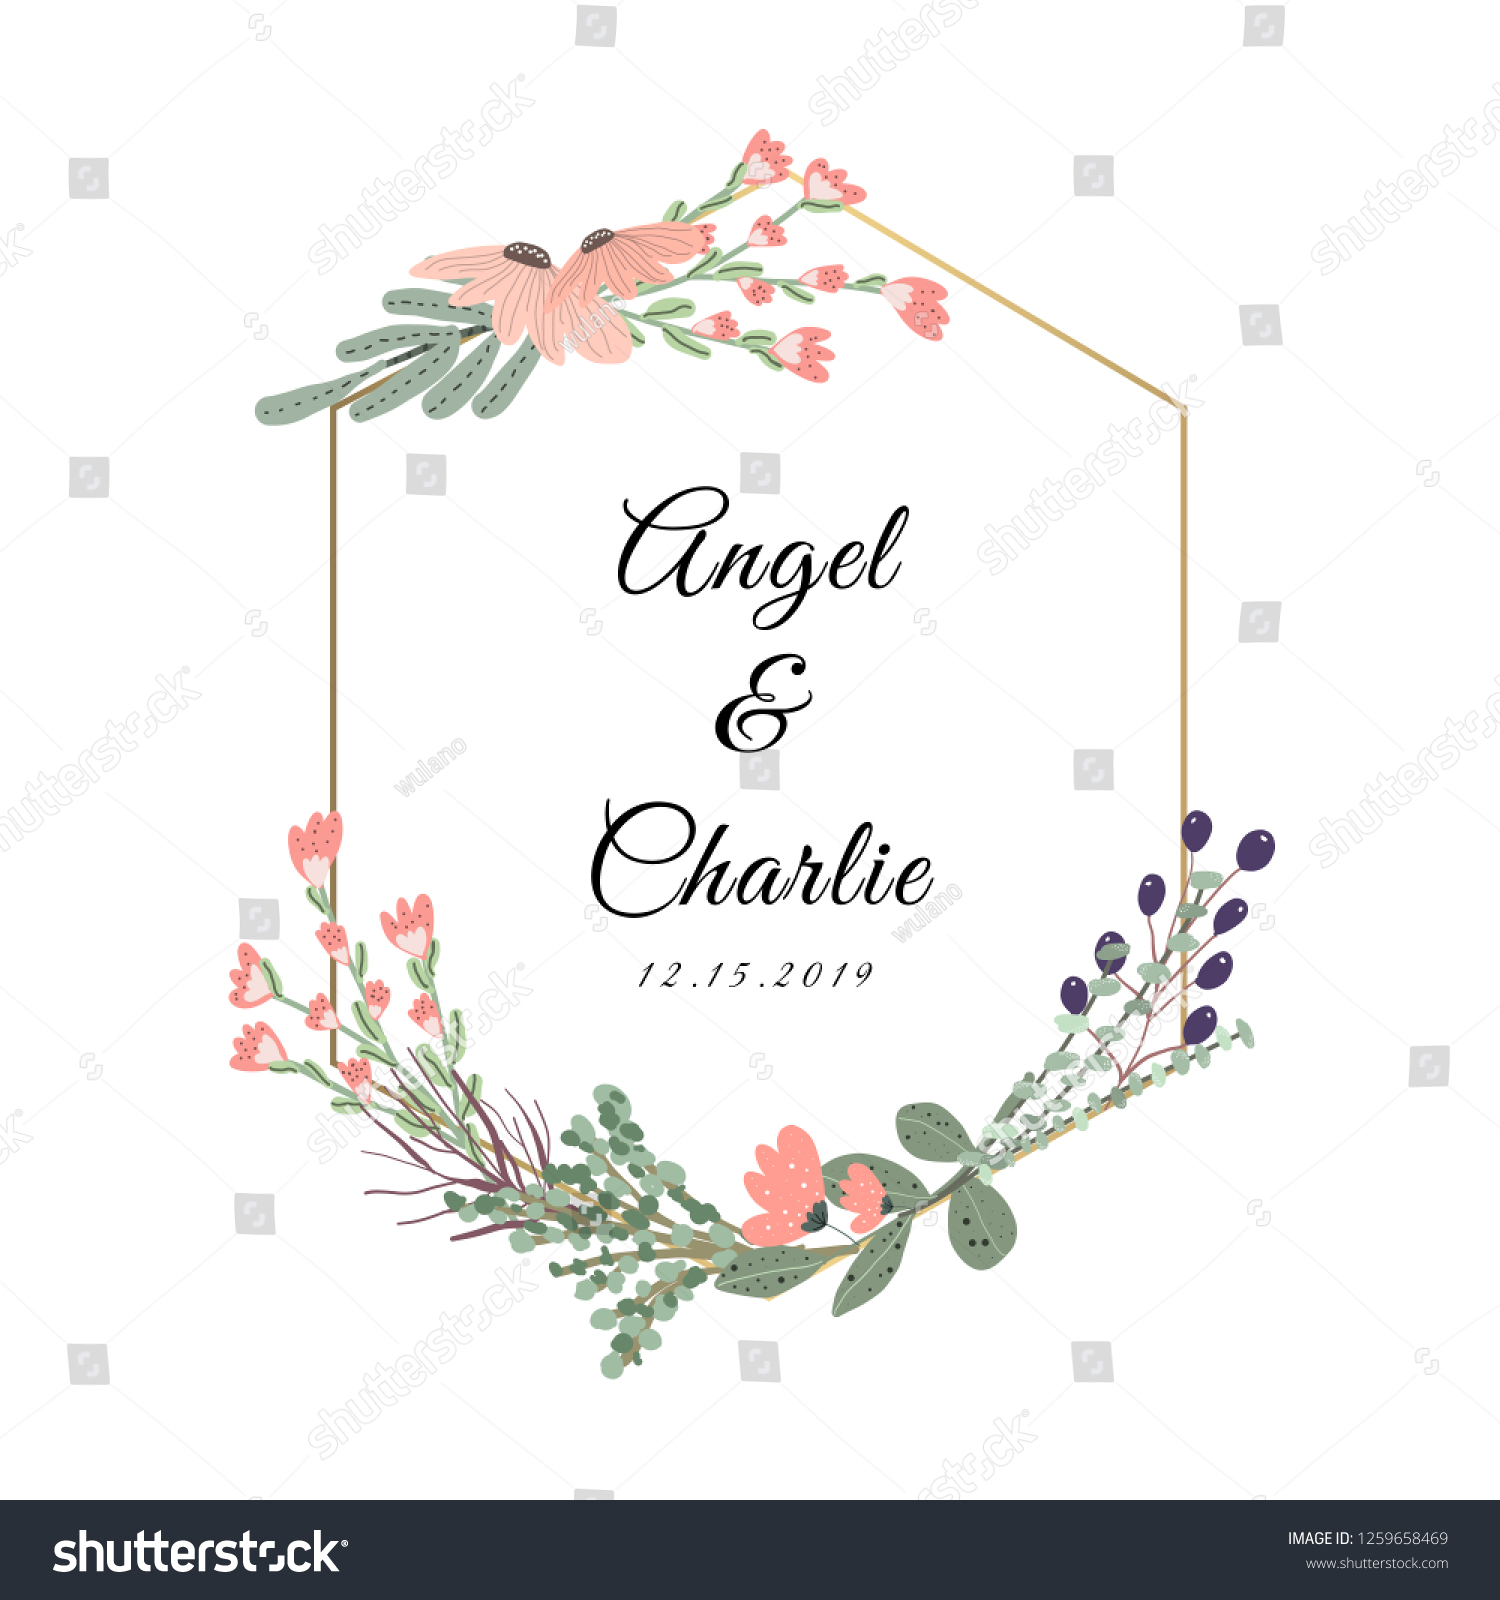 wedding badge with beautiful floral frame #1259658469